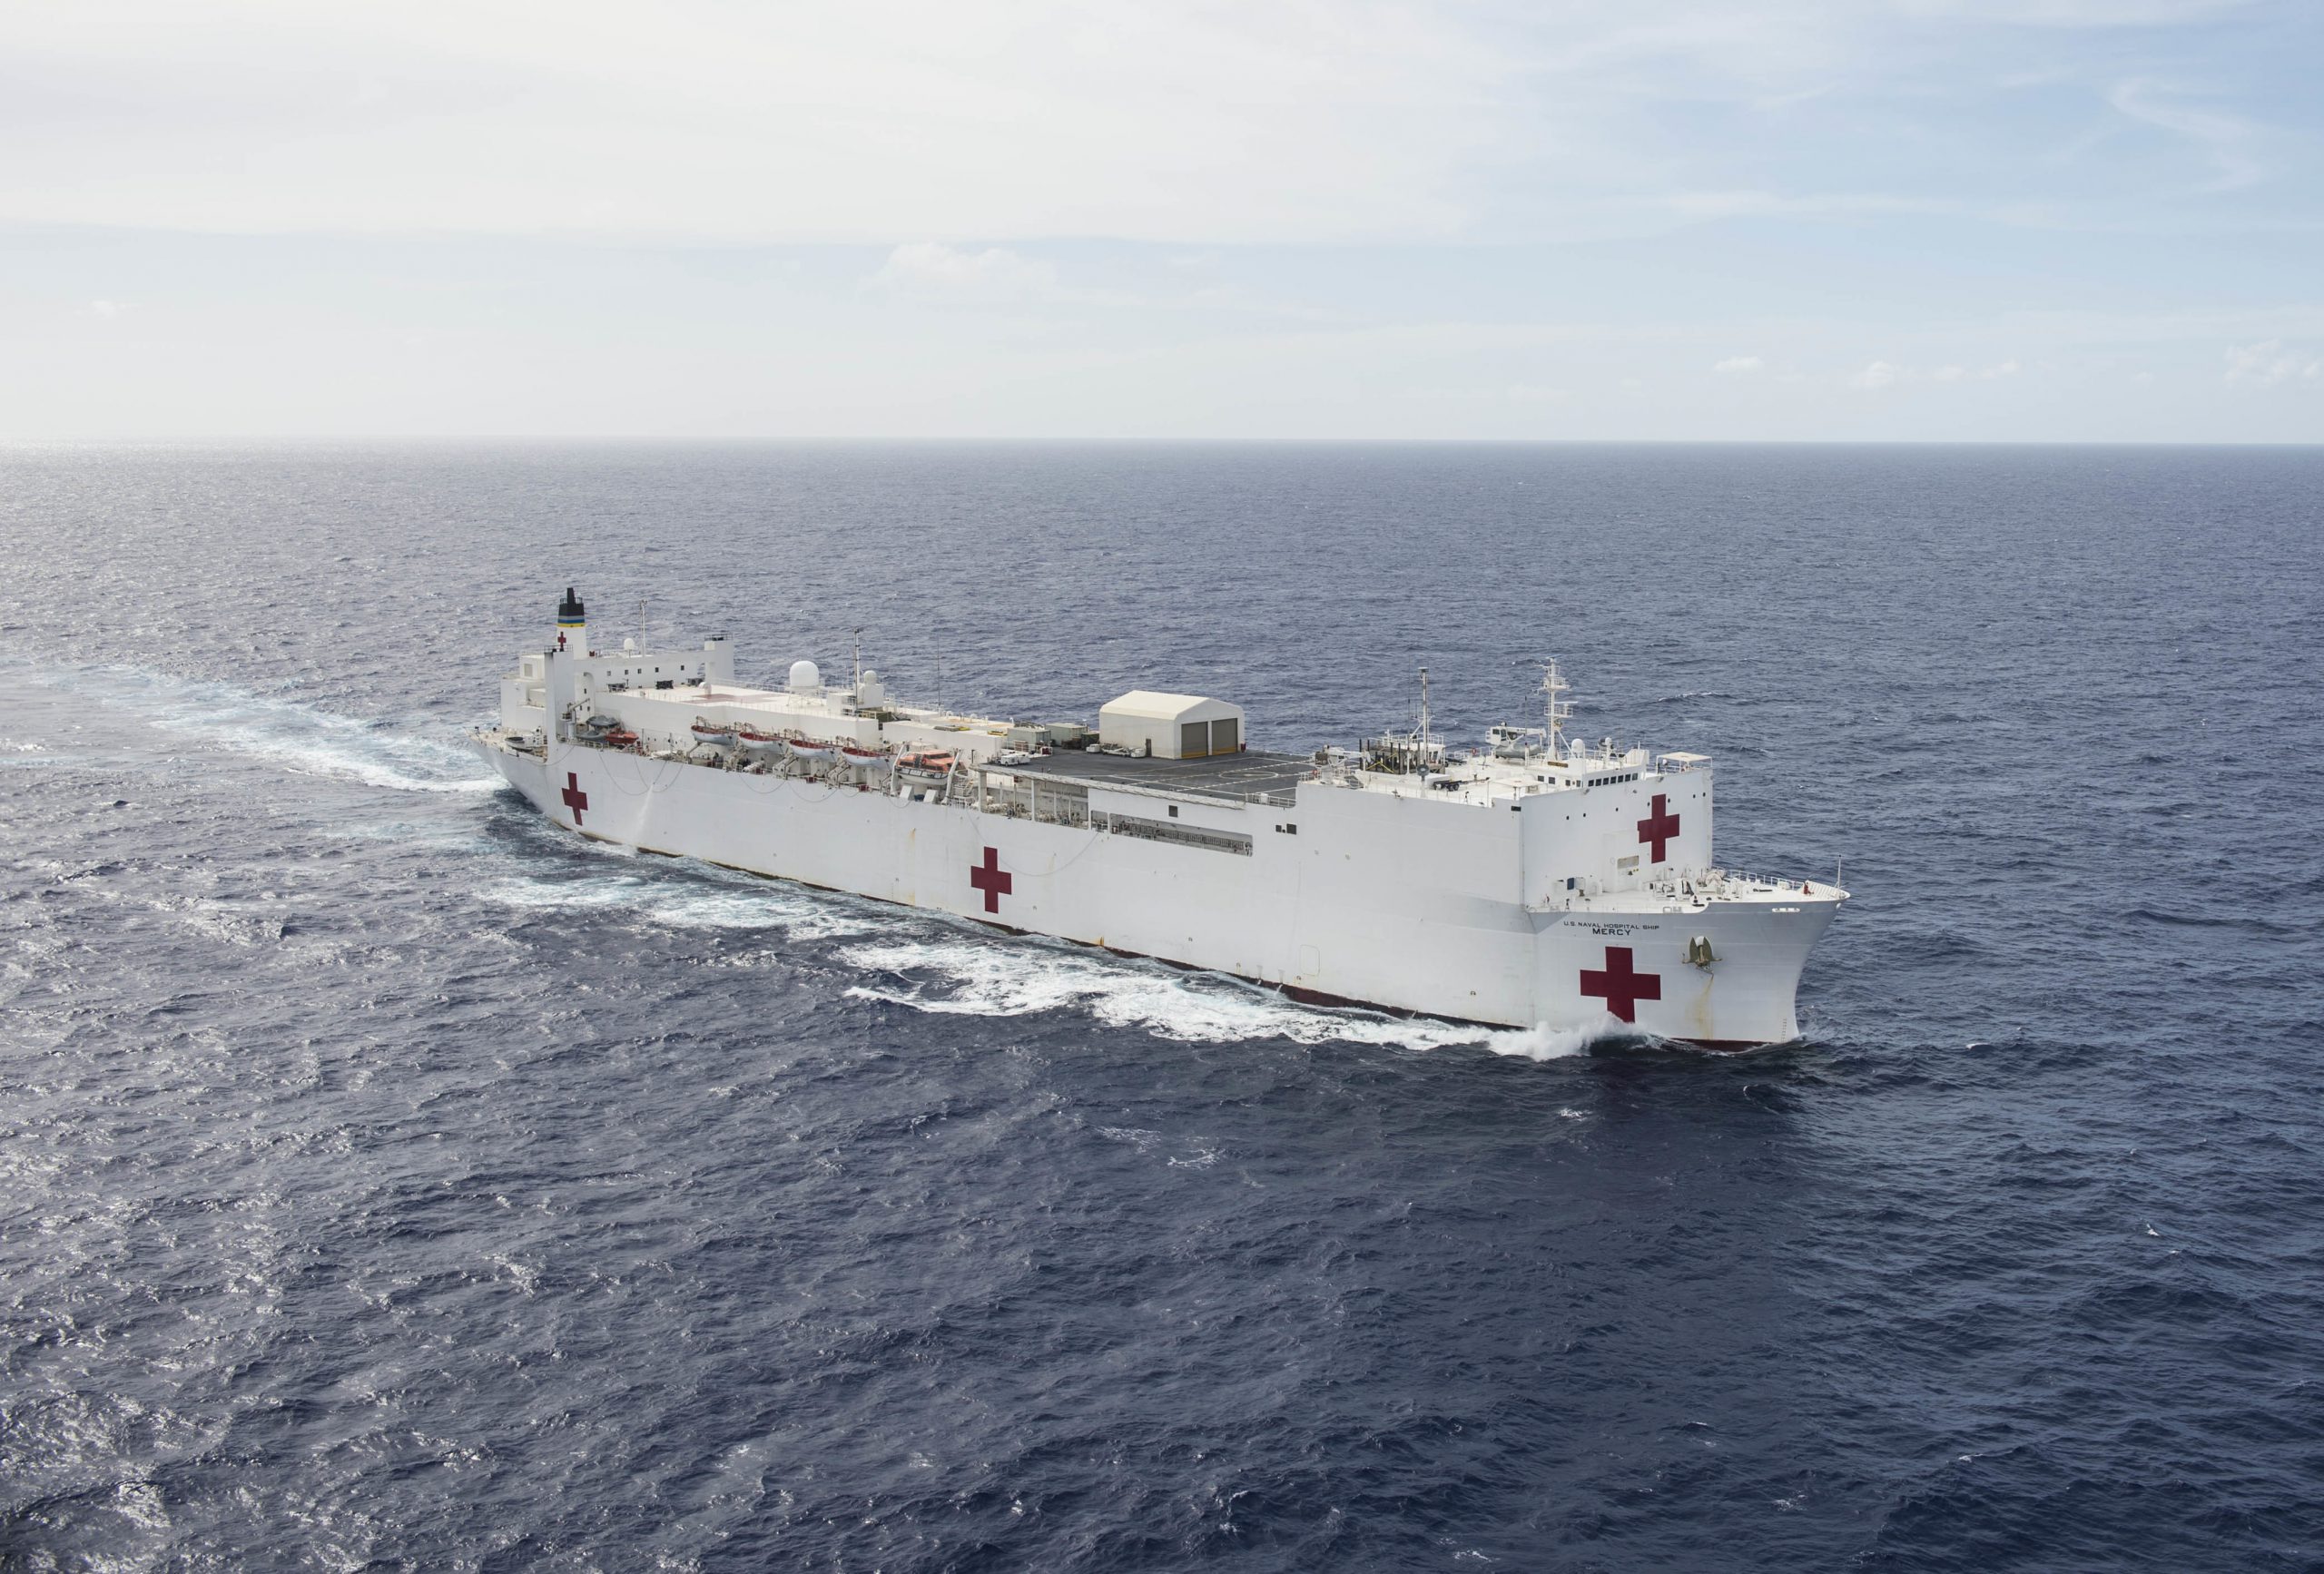 The hospital ship USNS Mercy steams in the Pacific Ocean after completing Pacific Partnership 2016 in the Indo-Pacific region, Sept. 12, 2016. The USNS Mercy will also participate in 2018’s Pacific Partnership mission. Navy photo by Petty Officer 2nd Class Hank Gettys -